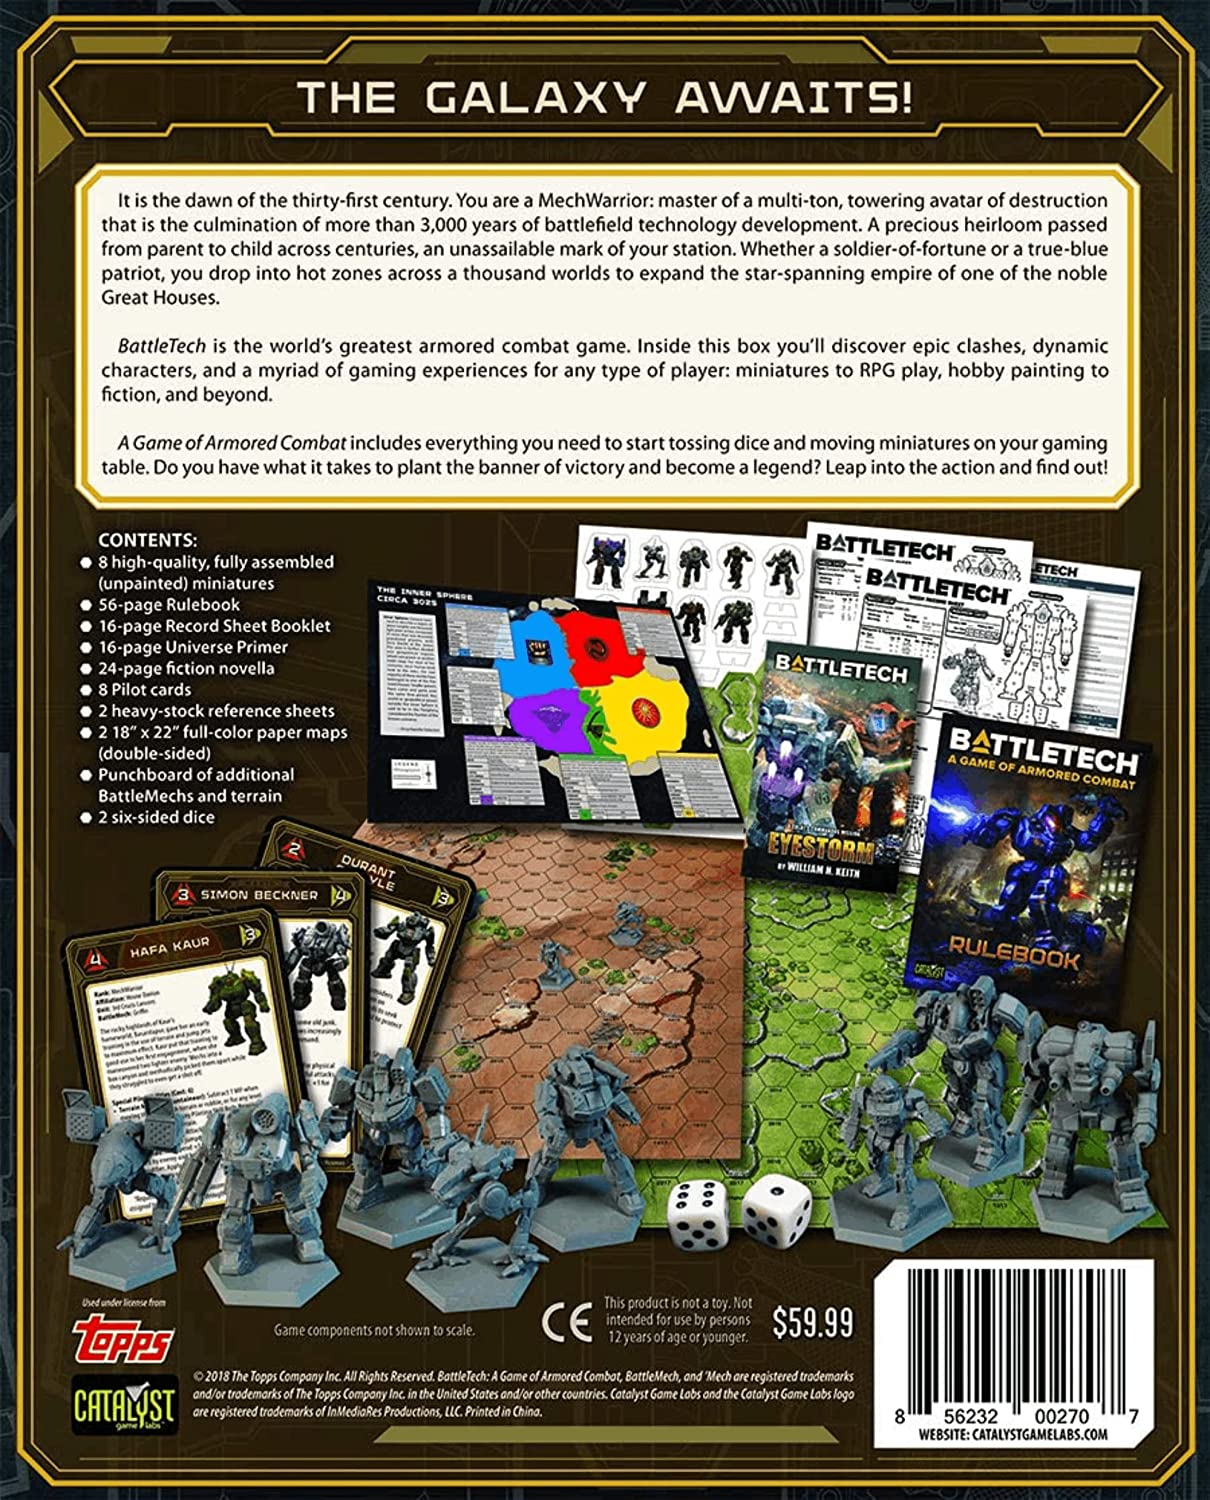 Battletech a game of armored combat